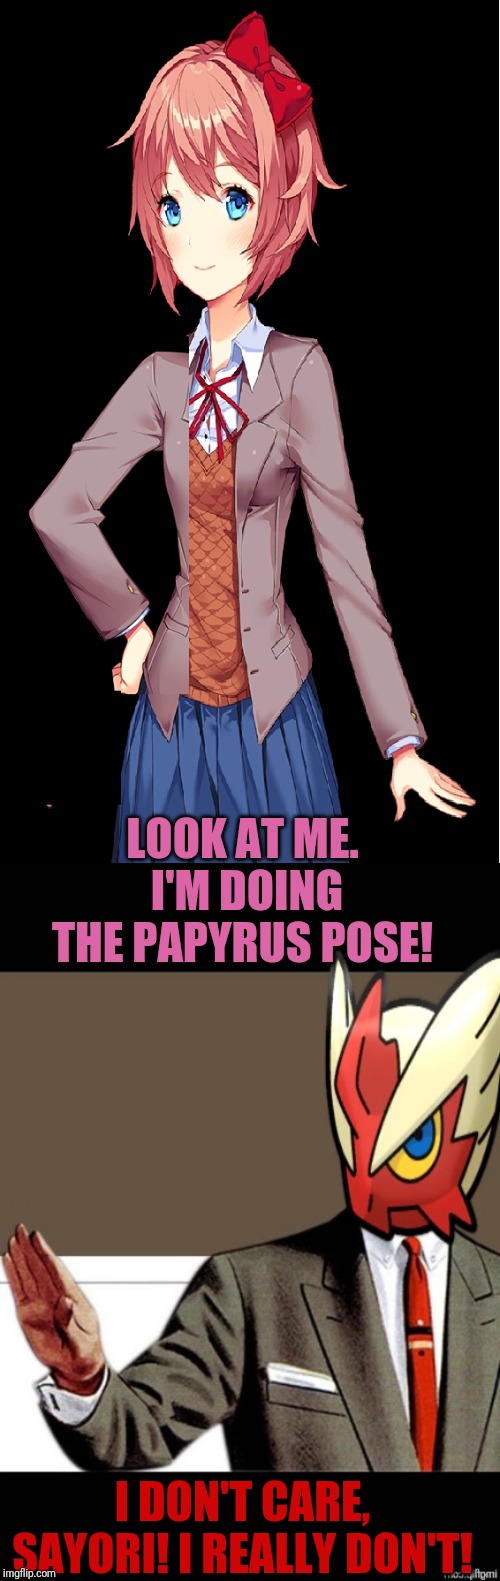 My savage level is. Over 9000! | LOOK AT ME. I'M DOING THE PAPYRUS POSE! I DON'T CARE, SAYORI! I REALLY DON'T! | image tagged in just shut up already blaze the blaziken,sayori papyrus pose,savage | made w/ Imgflip meme maker